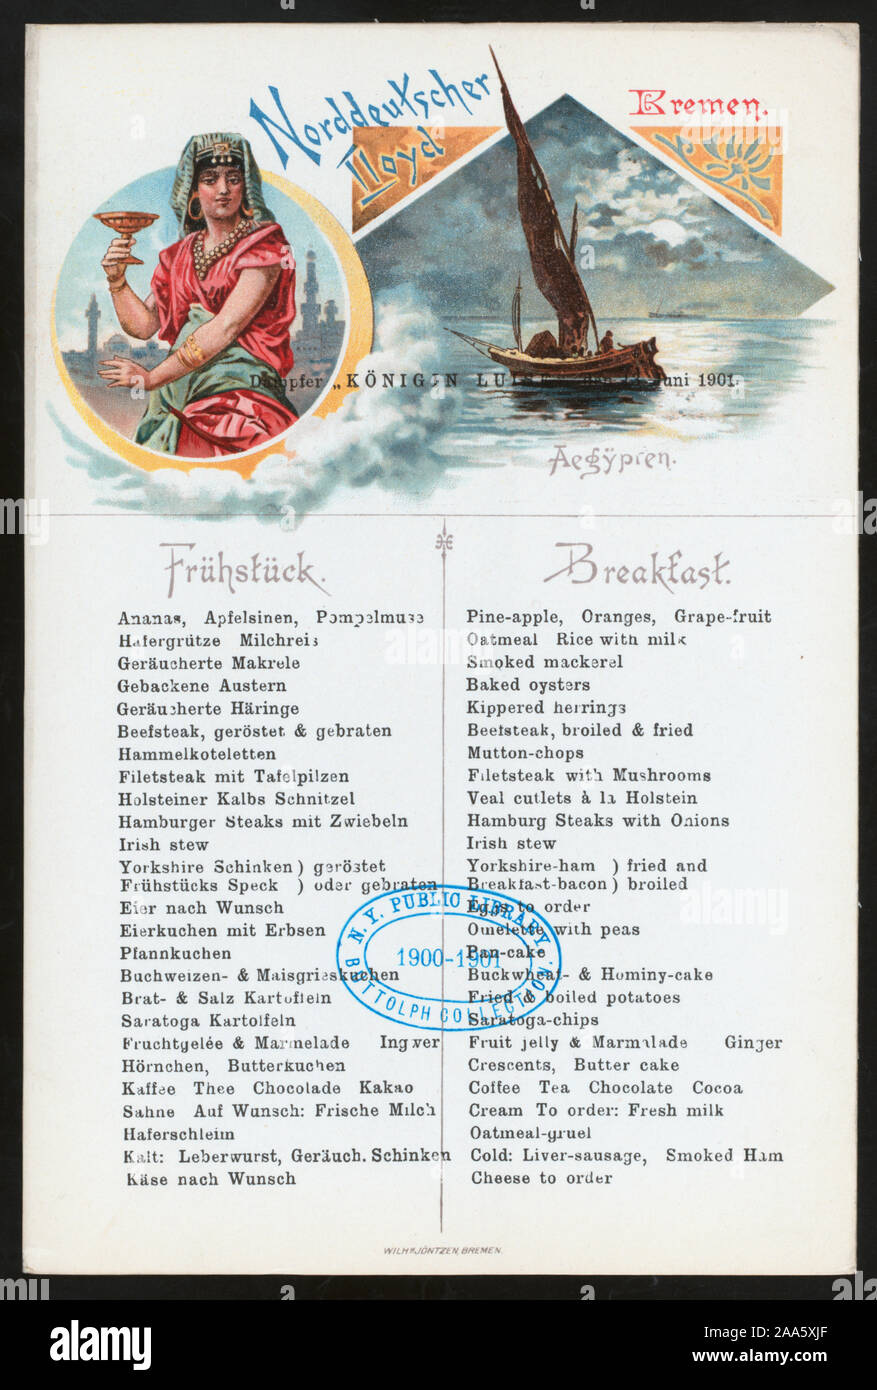 ASIAN WOMAN;BOAT ON WATER;MENUS SEPARATE IN GERMAN AND ENGLISH;MAY BE USED AS POSTCARD Citation/Reference: 1901-1624; BREAKFAST [held by] NORDDEUTSCHER LLOYD BREMEN [at] SS KONIGIN LUISE (SS;) Stock Photo